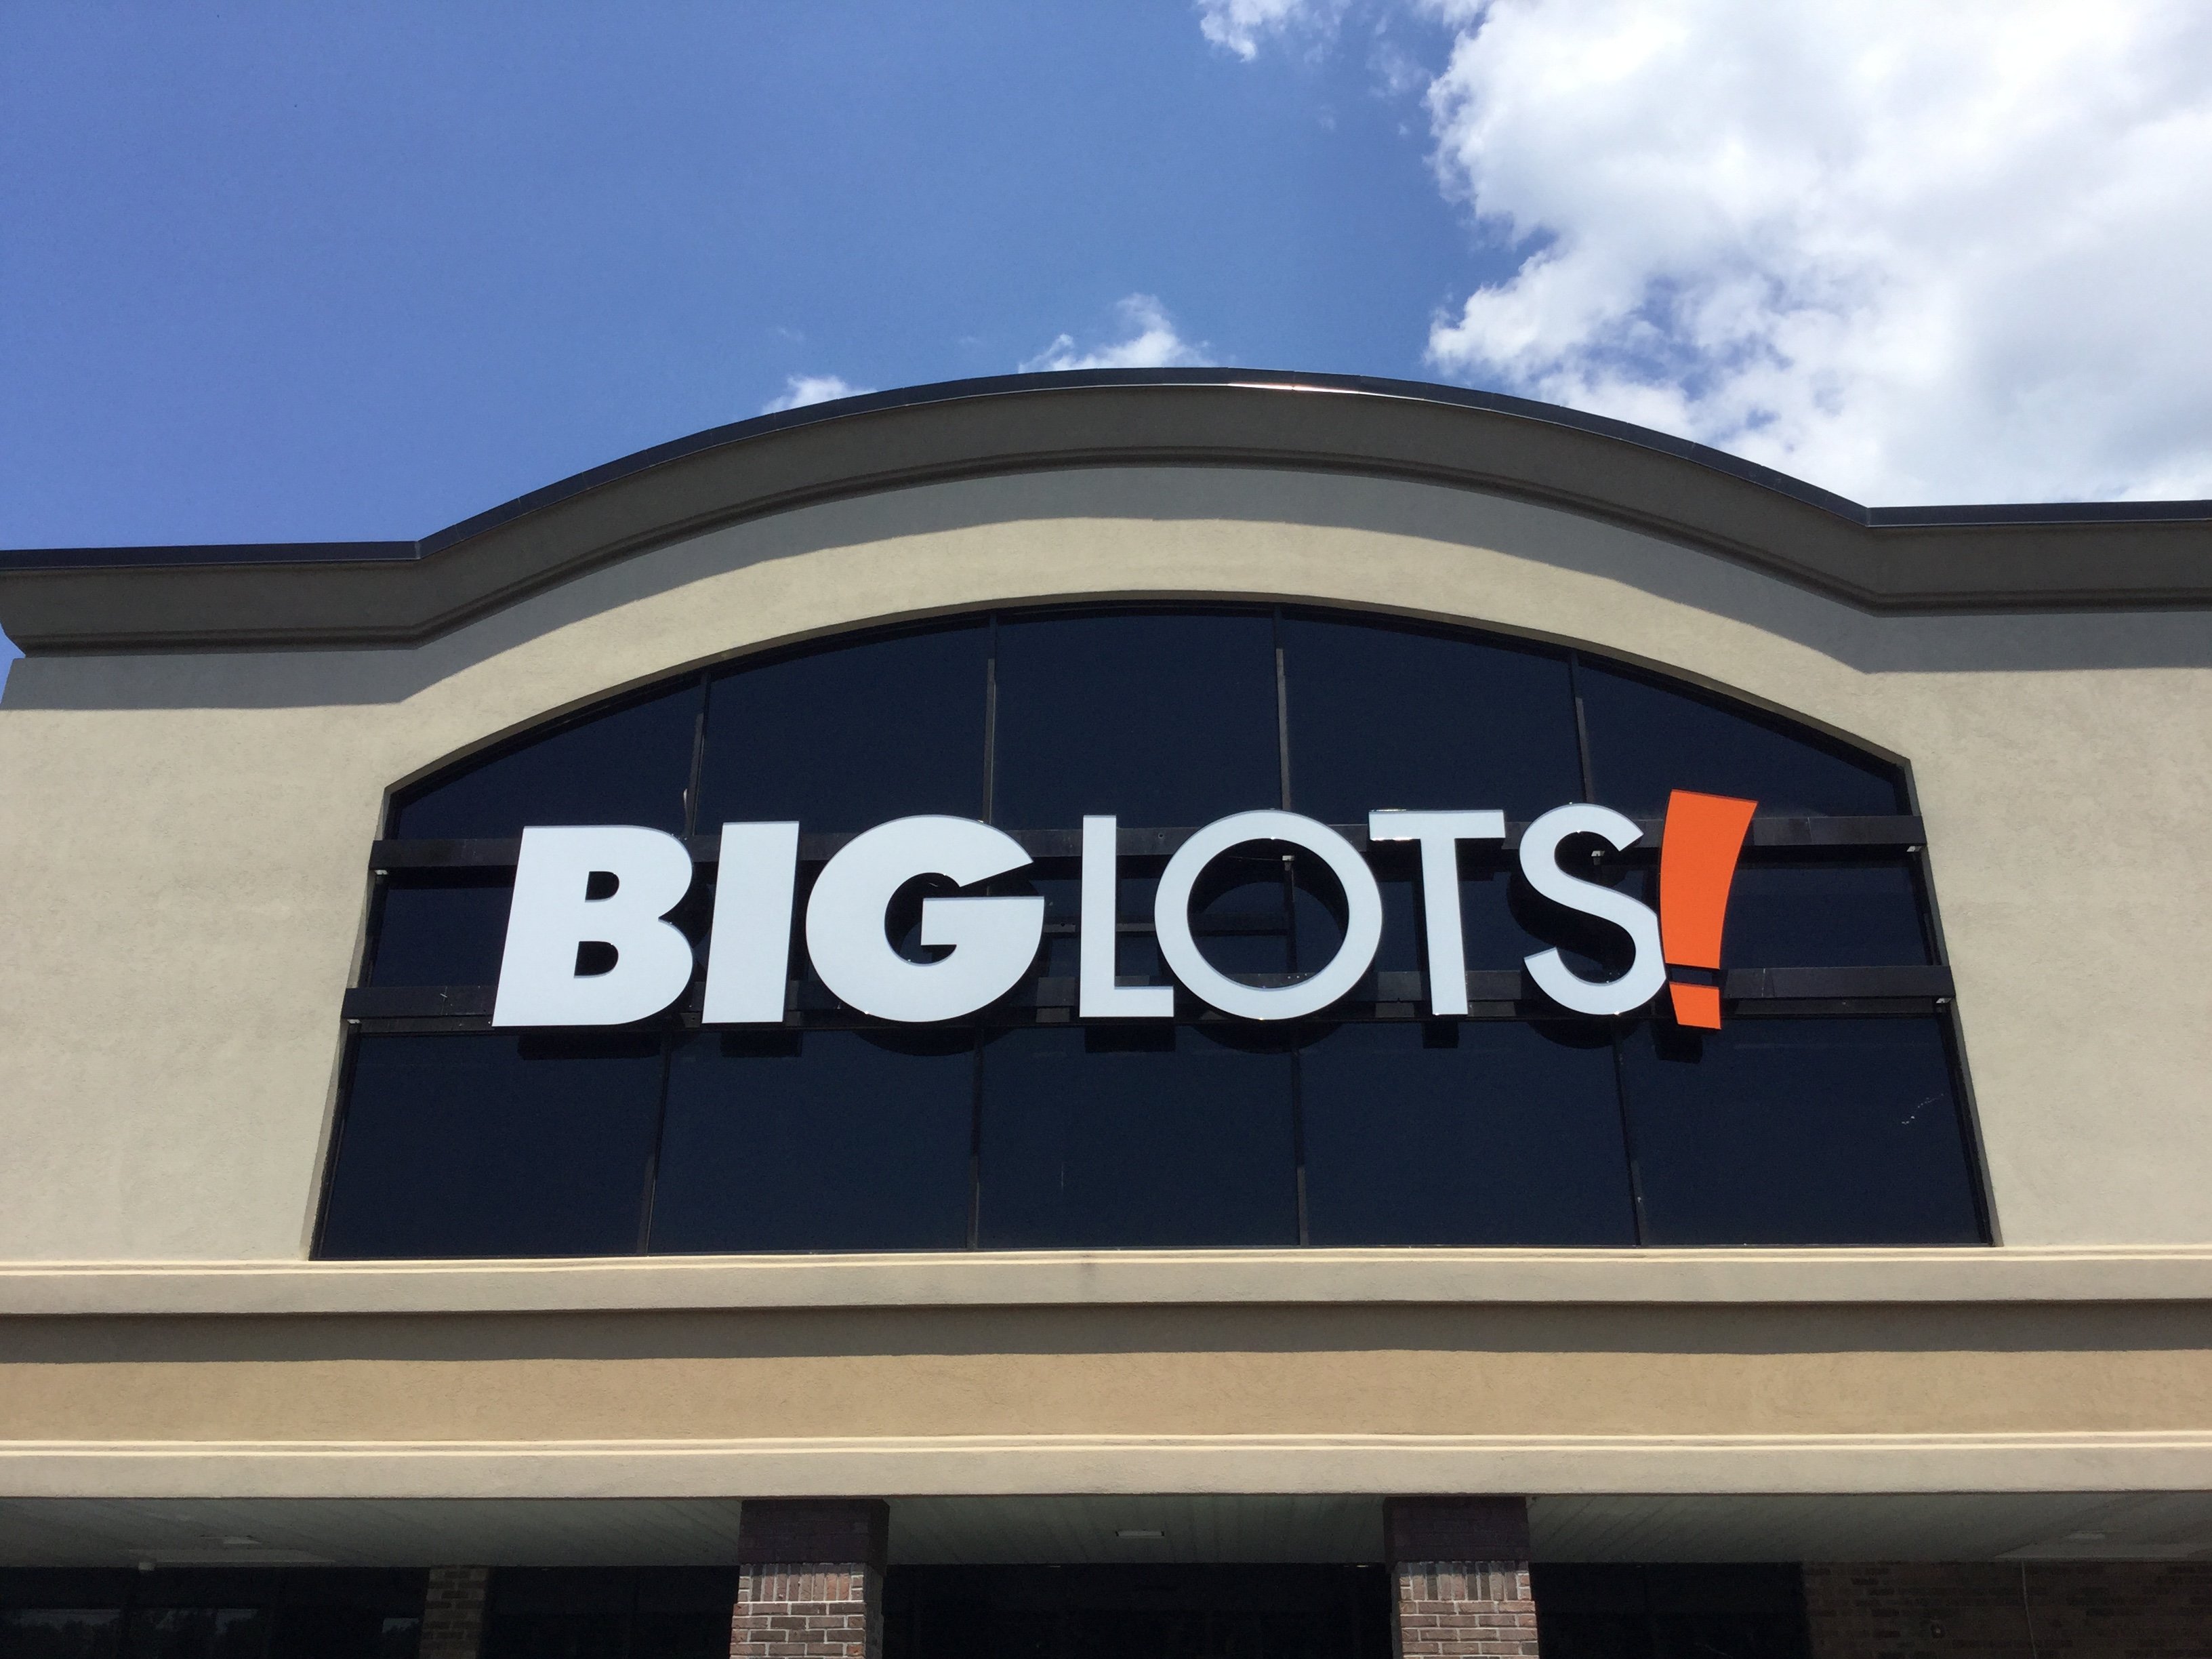 Visit The Big Lots In Knoxville Tn Located On 4580b Chapman Hwy